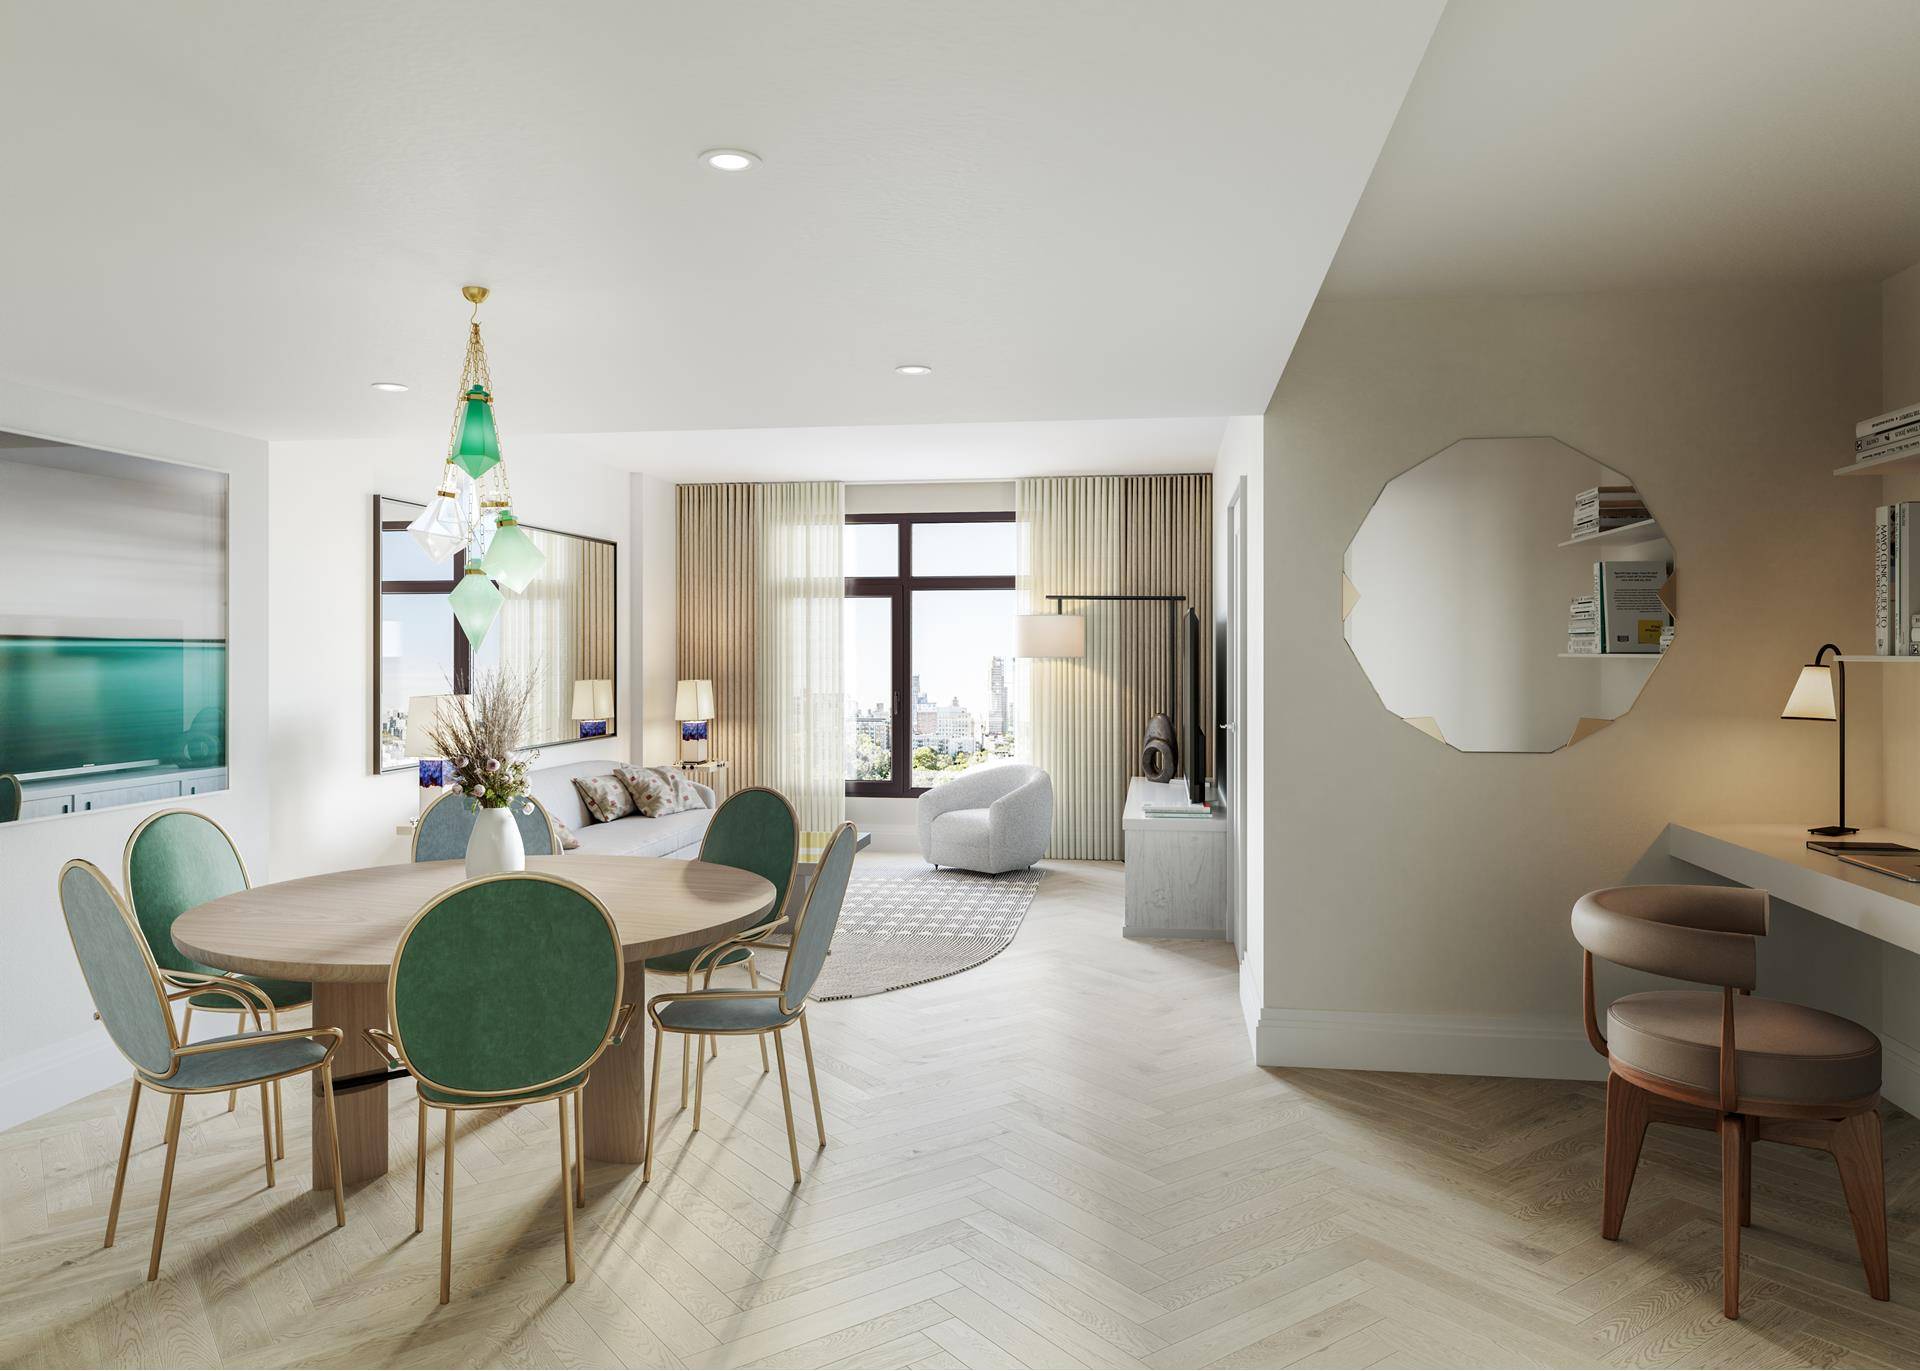 Sales Gallery Now Open By Appointment Introducing residence 8R at 300 West, a northwestern facing studio offering an open concept living area that boasts custom White Oak herringbone flooring, central ...